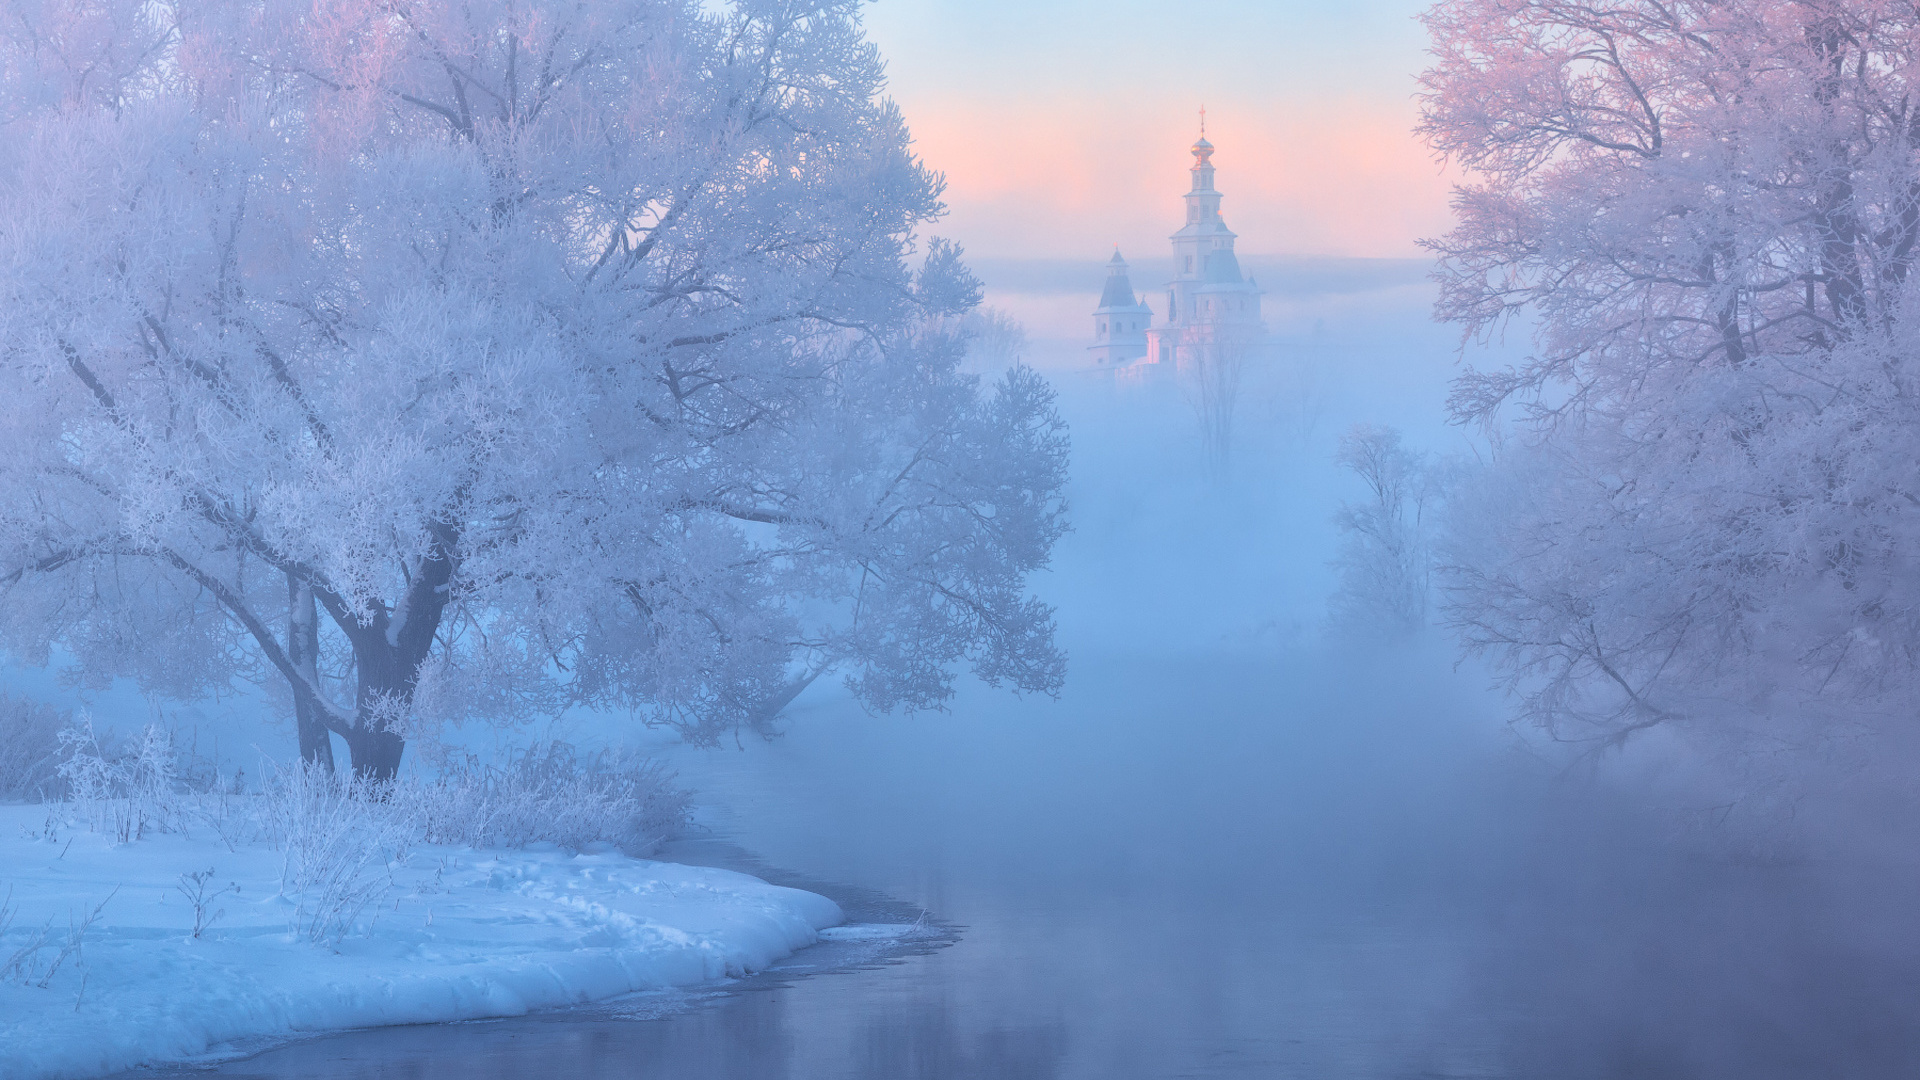 General 1920x1080 nature landscape winter snow trees river morning mist castle sunset cold frost ice